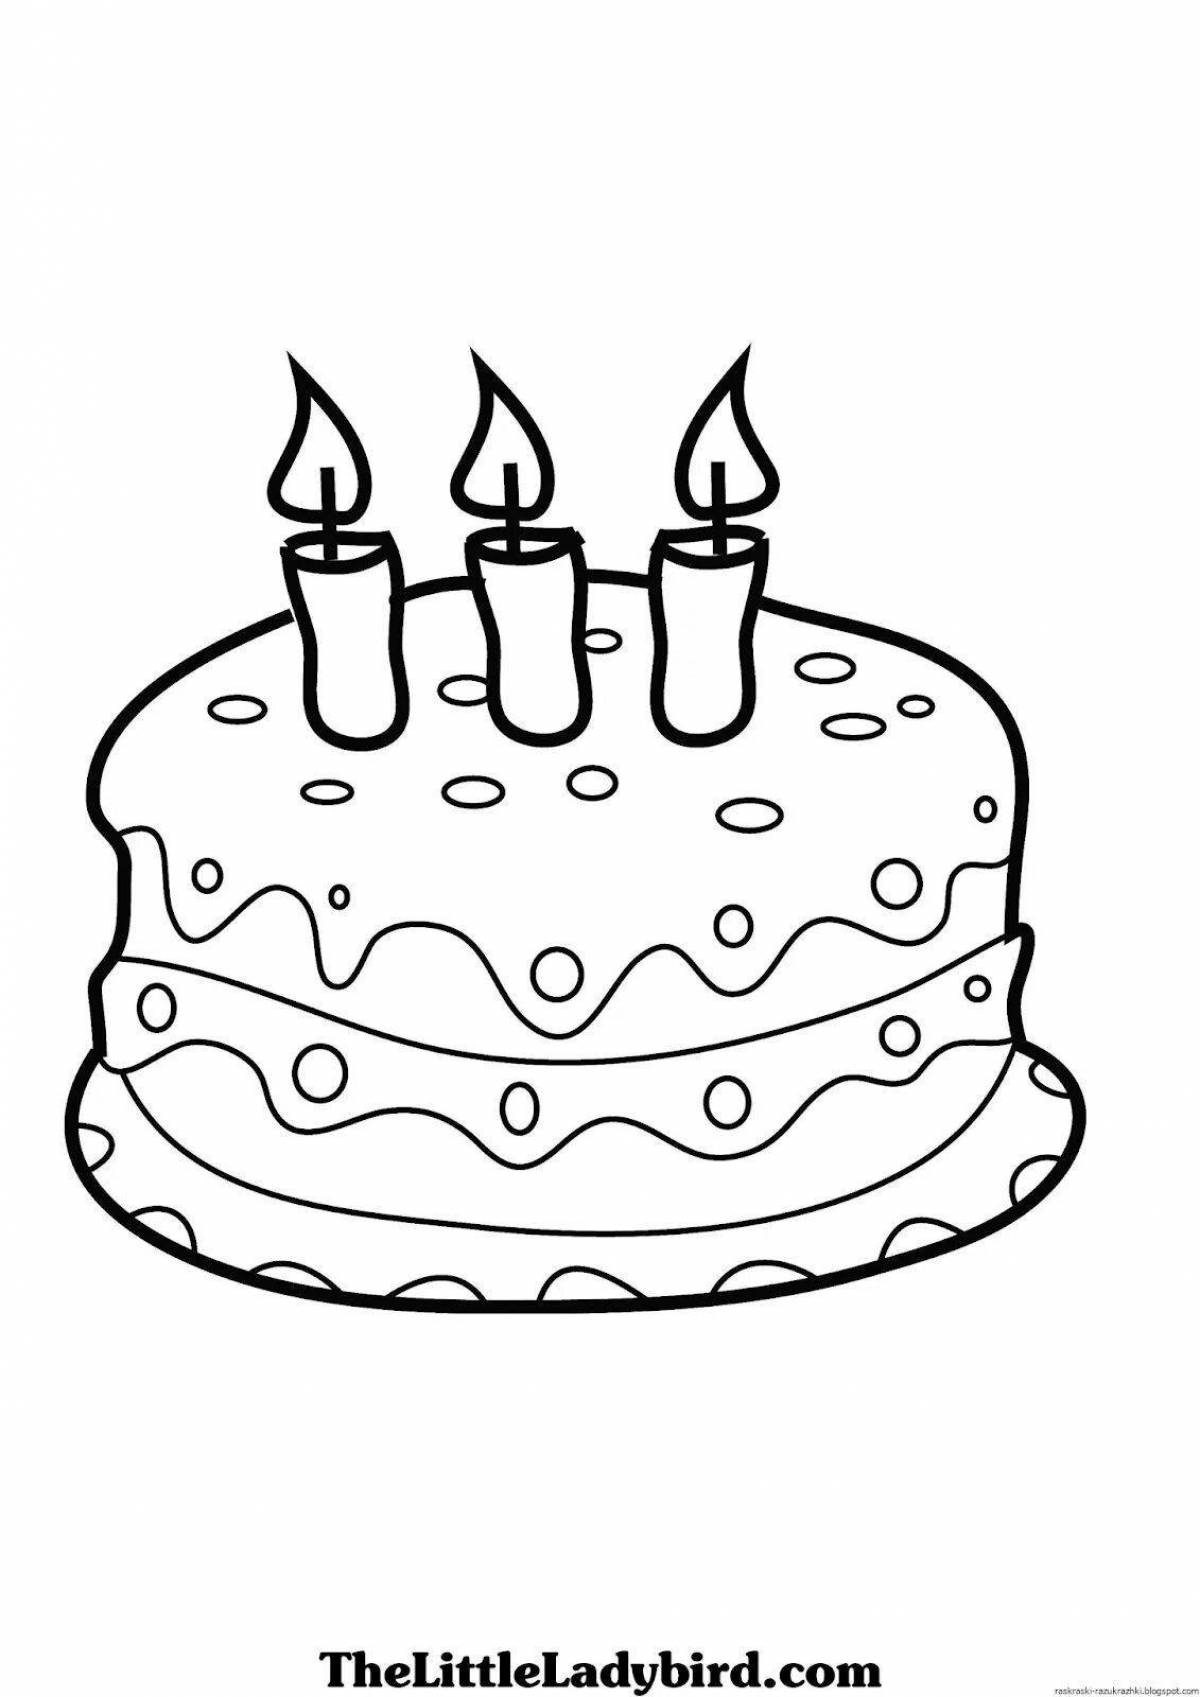 Playful birthday cake coloring page